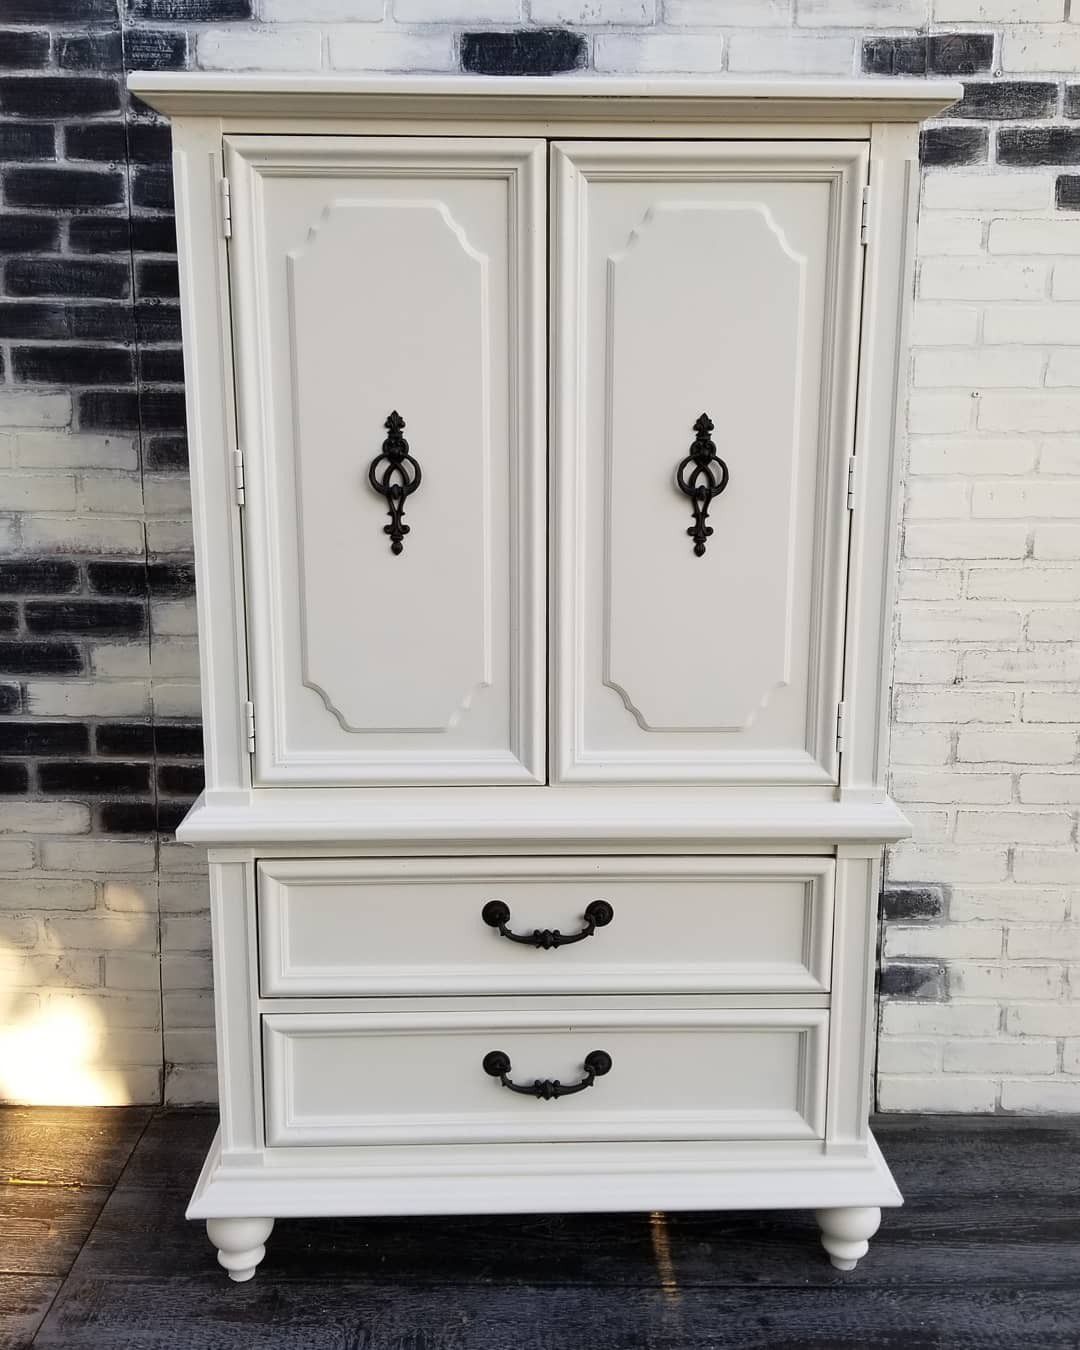 French provincial/Credenza. Dresser. 3 drawers/shelves. Cotton white